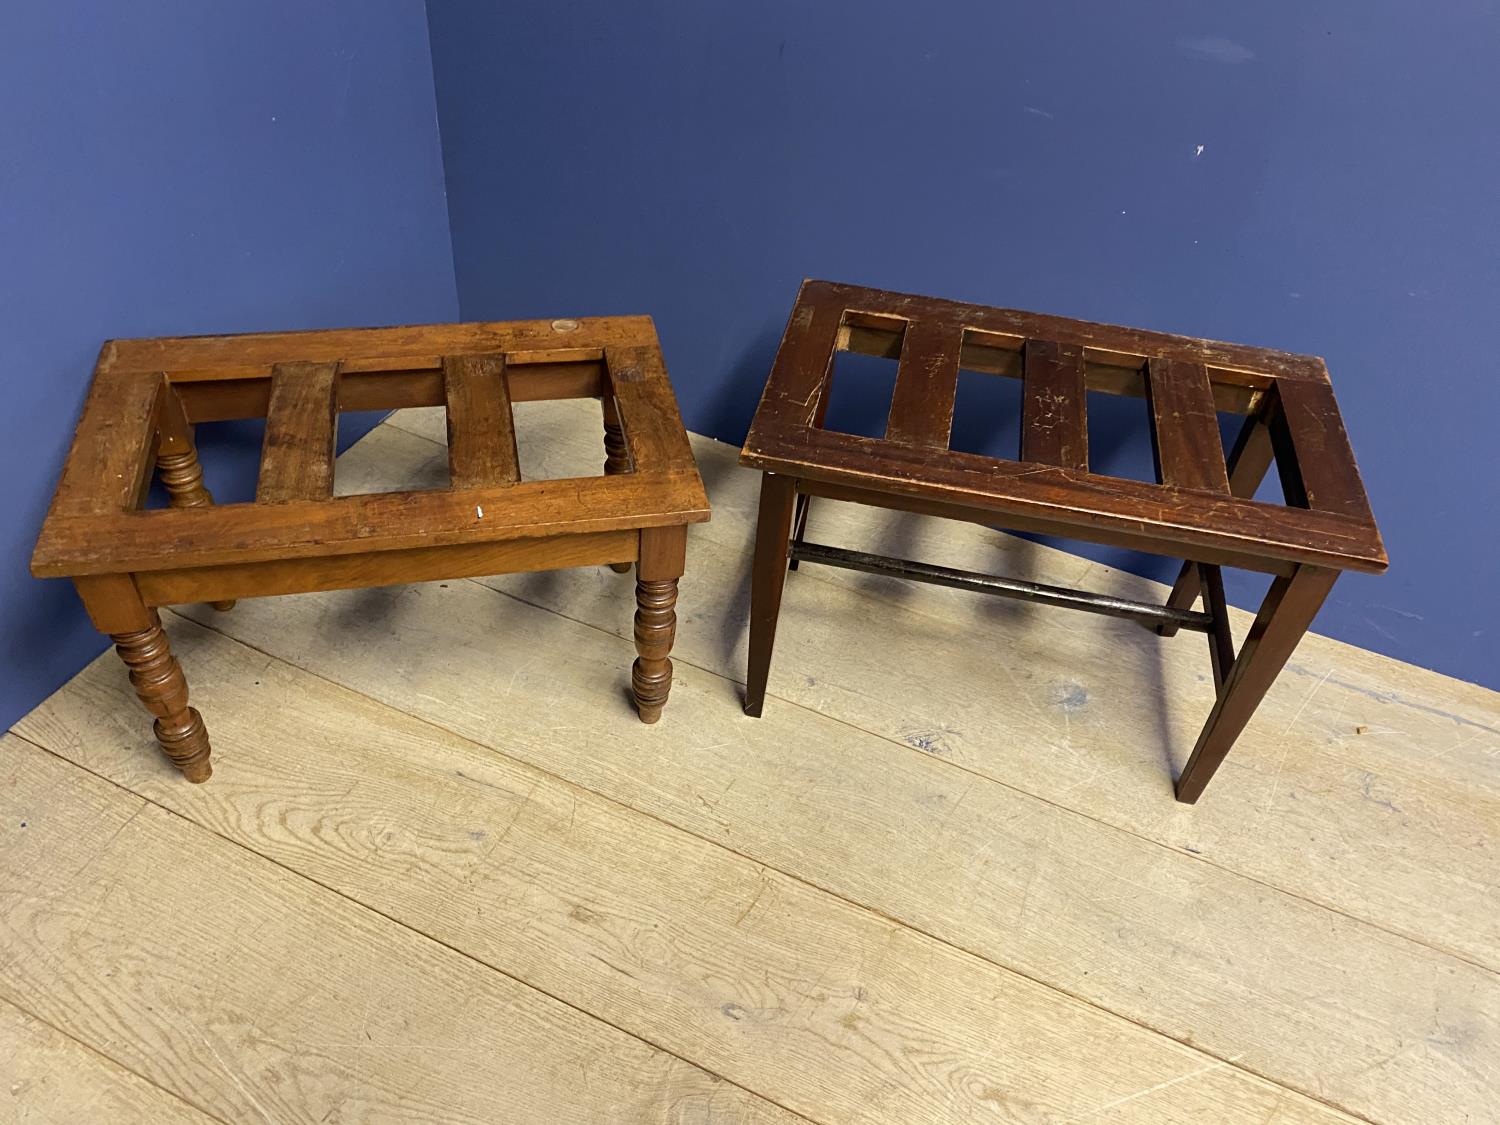 2 traditional luggage racks, some scratches/wear